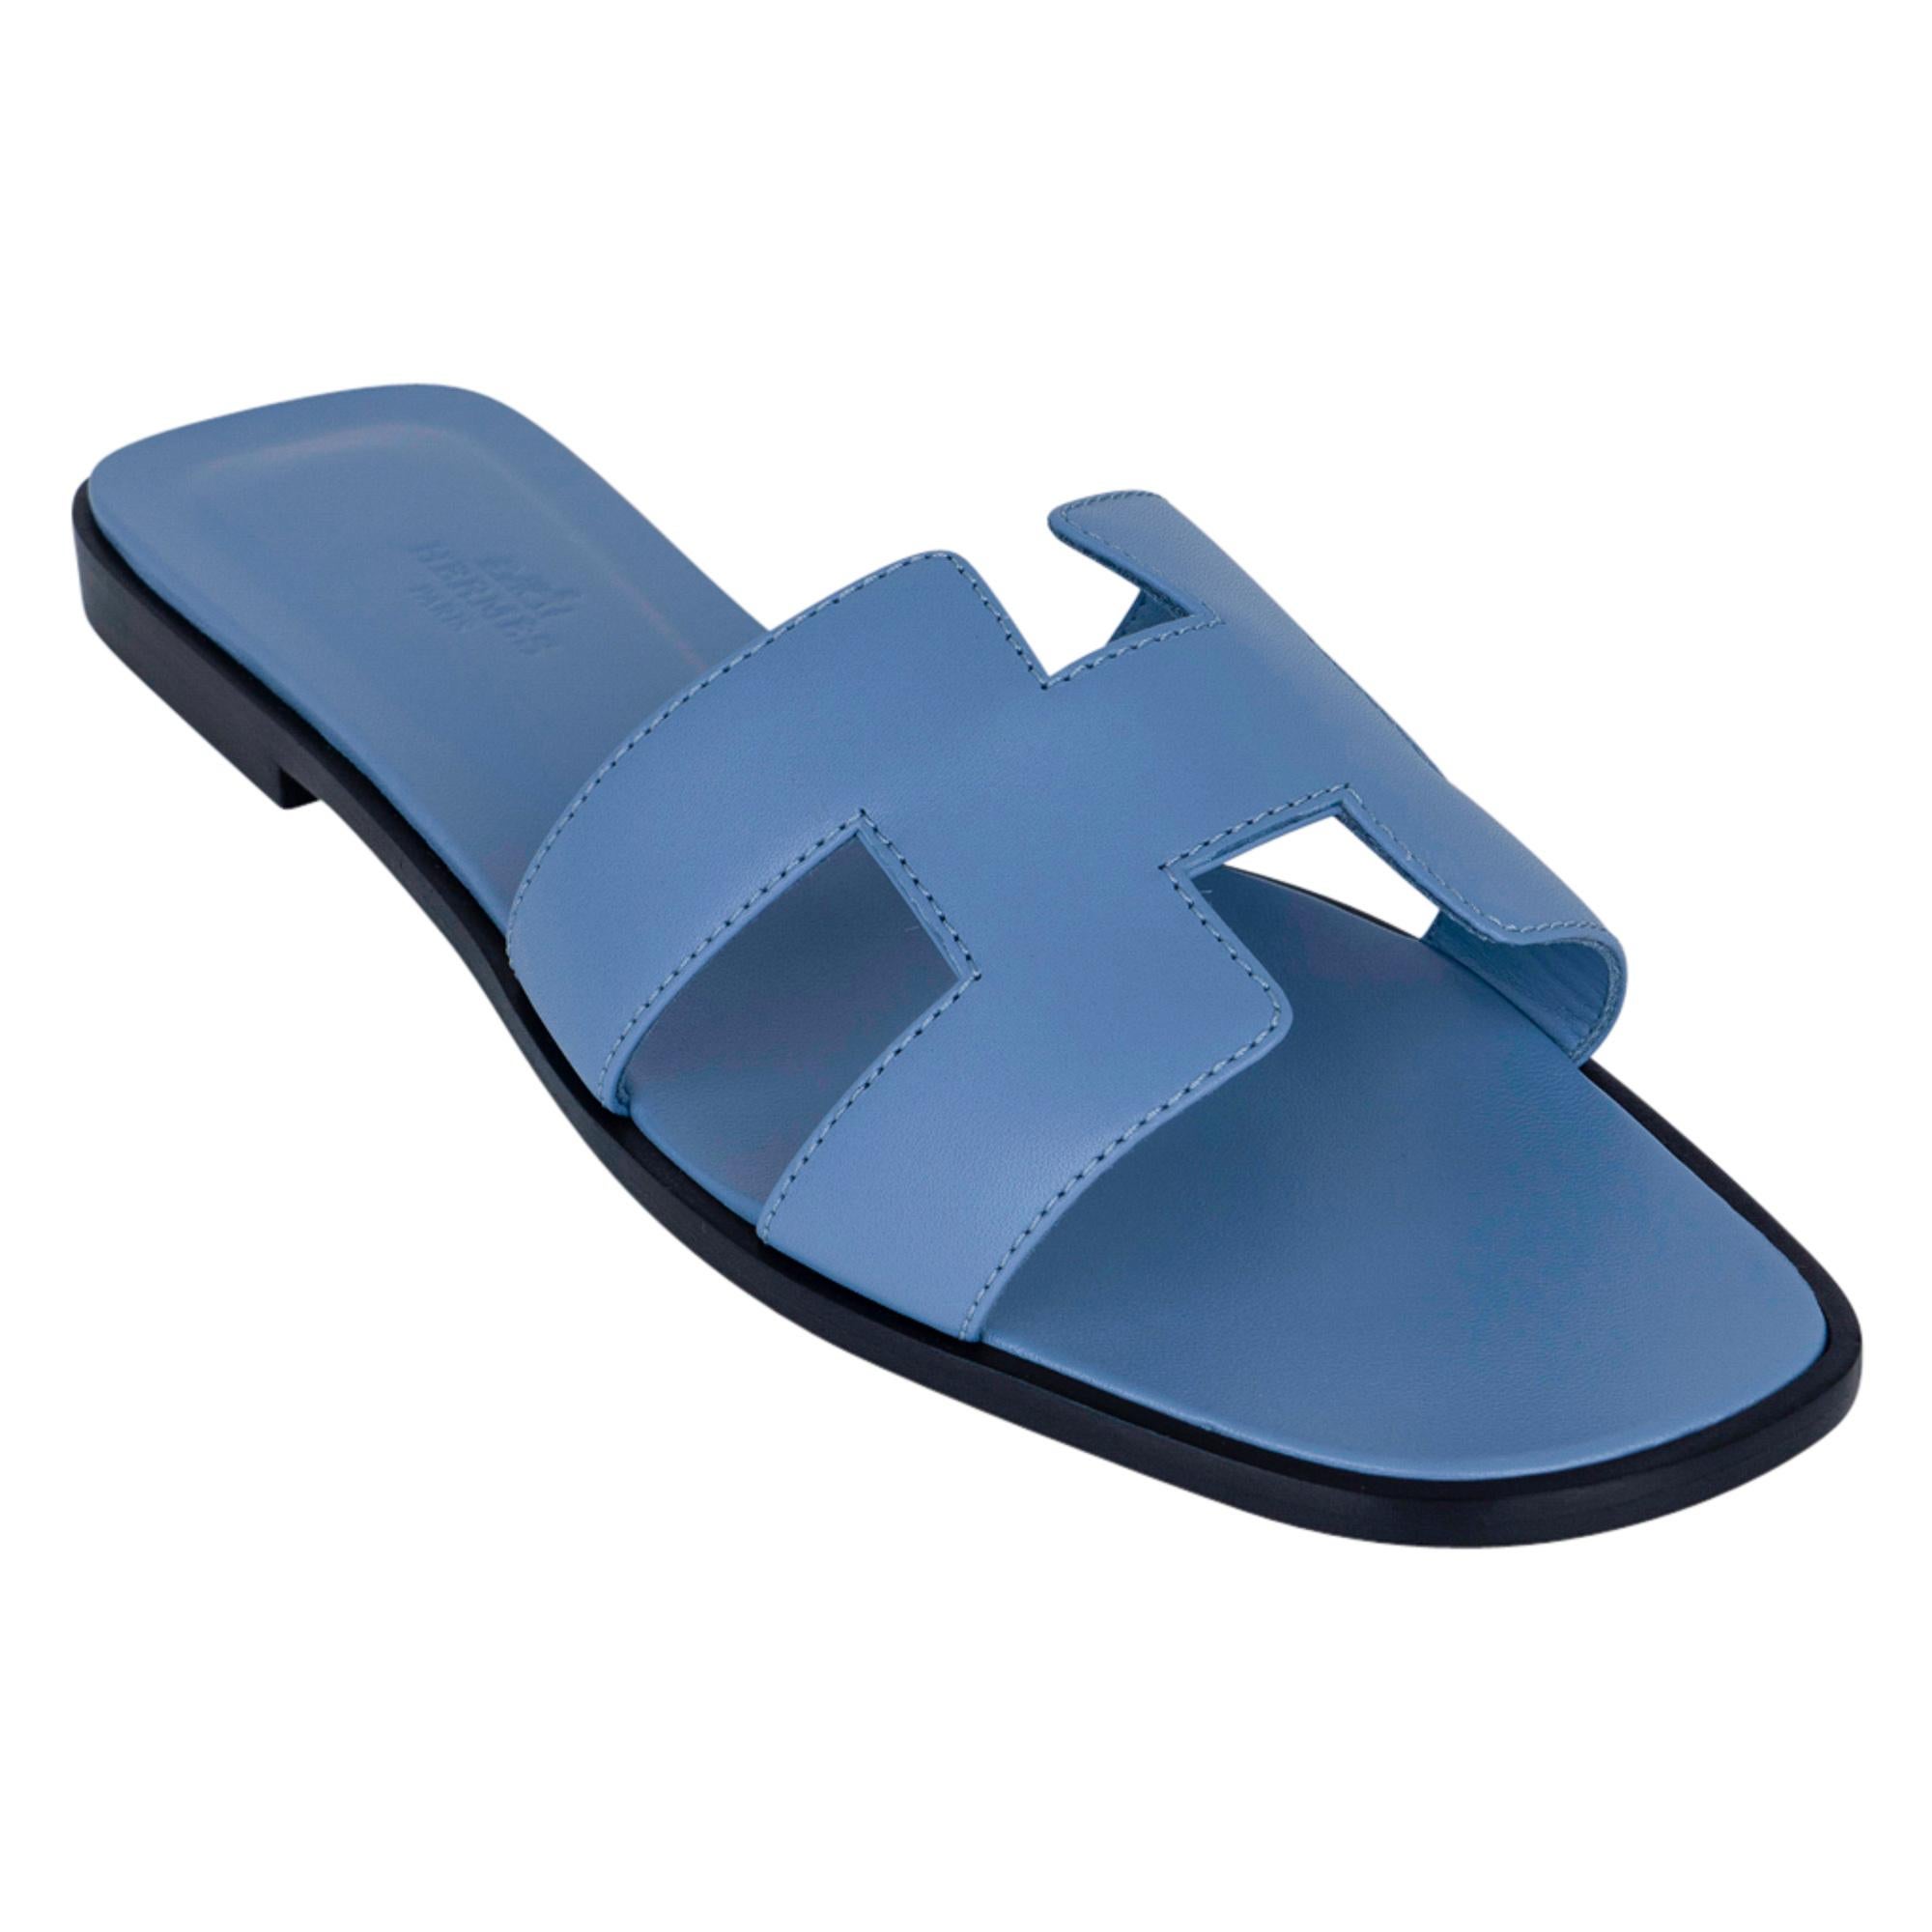 Guaranteed authentic Hermes Oran flat sandal features in beautiful Beu Bleuet.
These neutral blue slides are a must for foot flirting!
Hermes Paris embossed leather insole. 
Wood heel with leather sole. 
Comes with sleepers and and signature Hermes